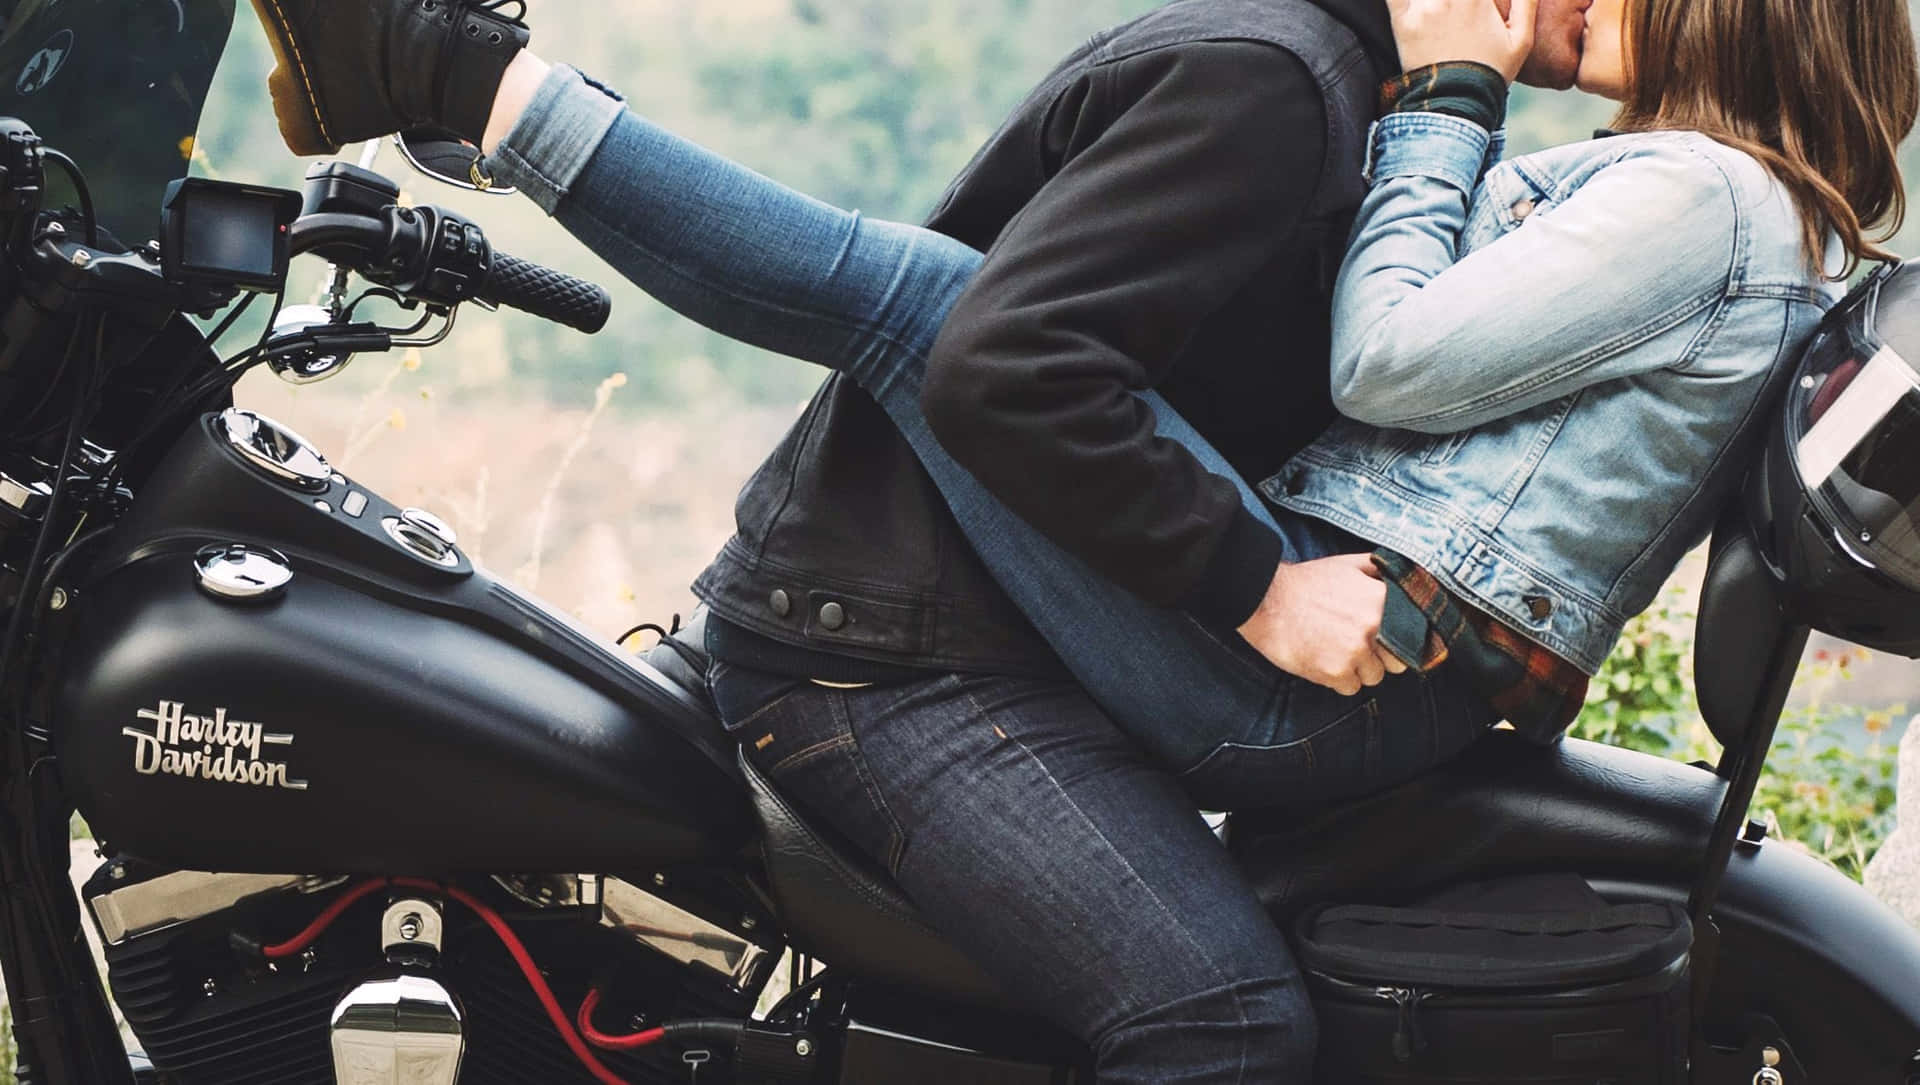 Couple Posing and Riding on a Motorcycle · Free Stock Photo